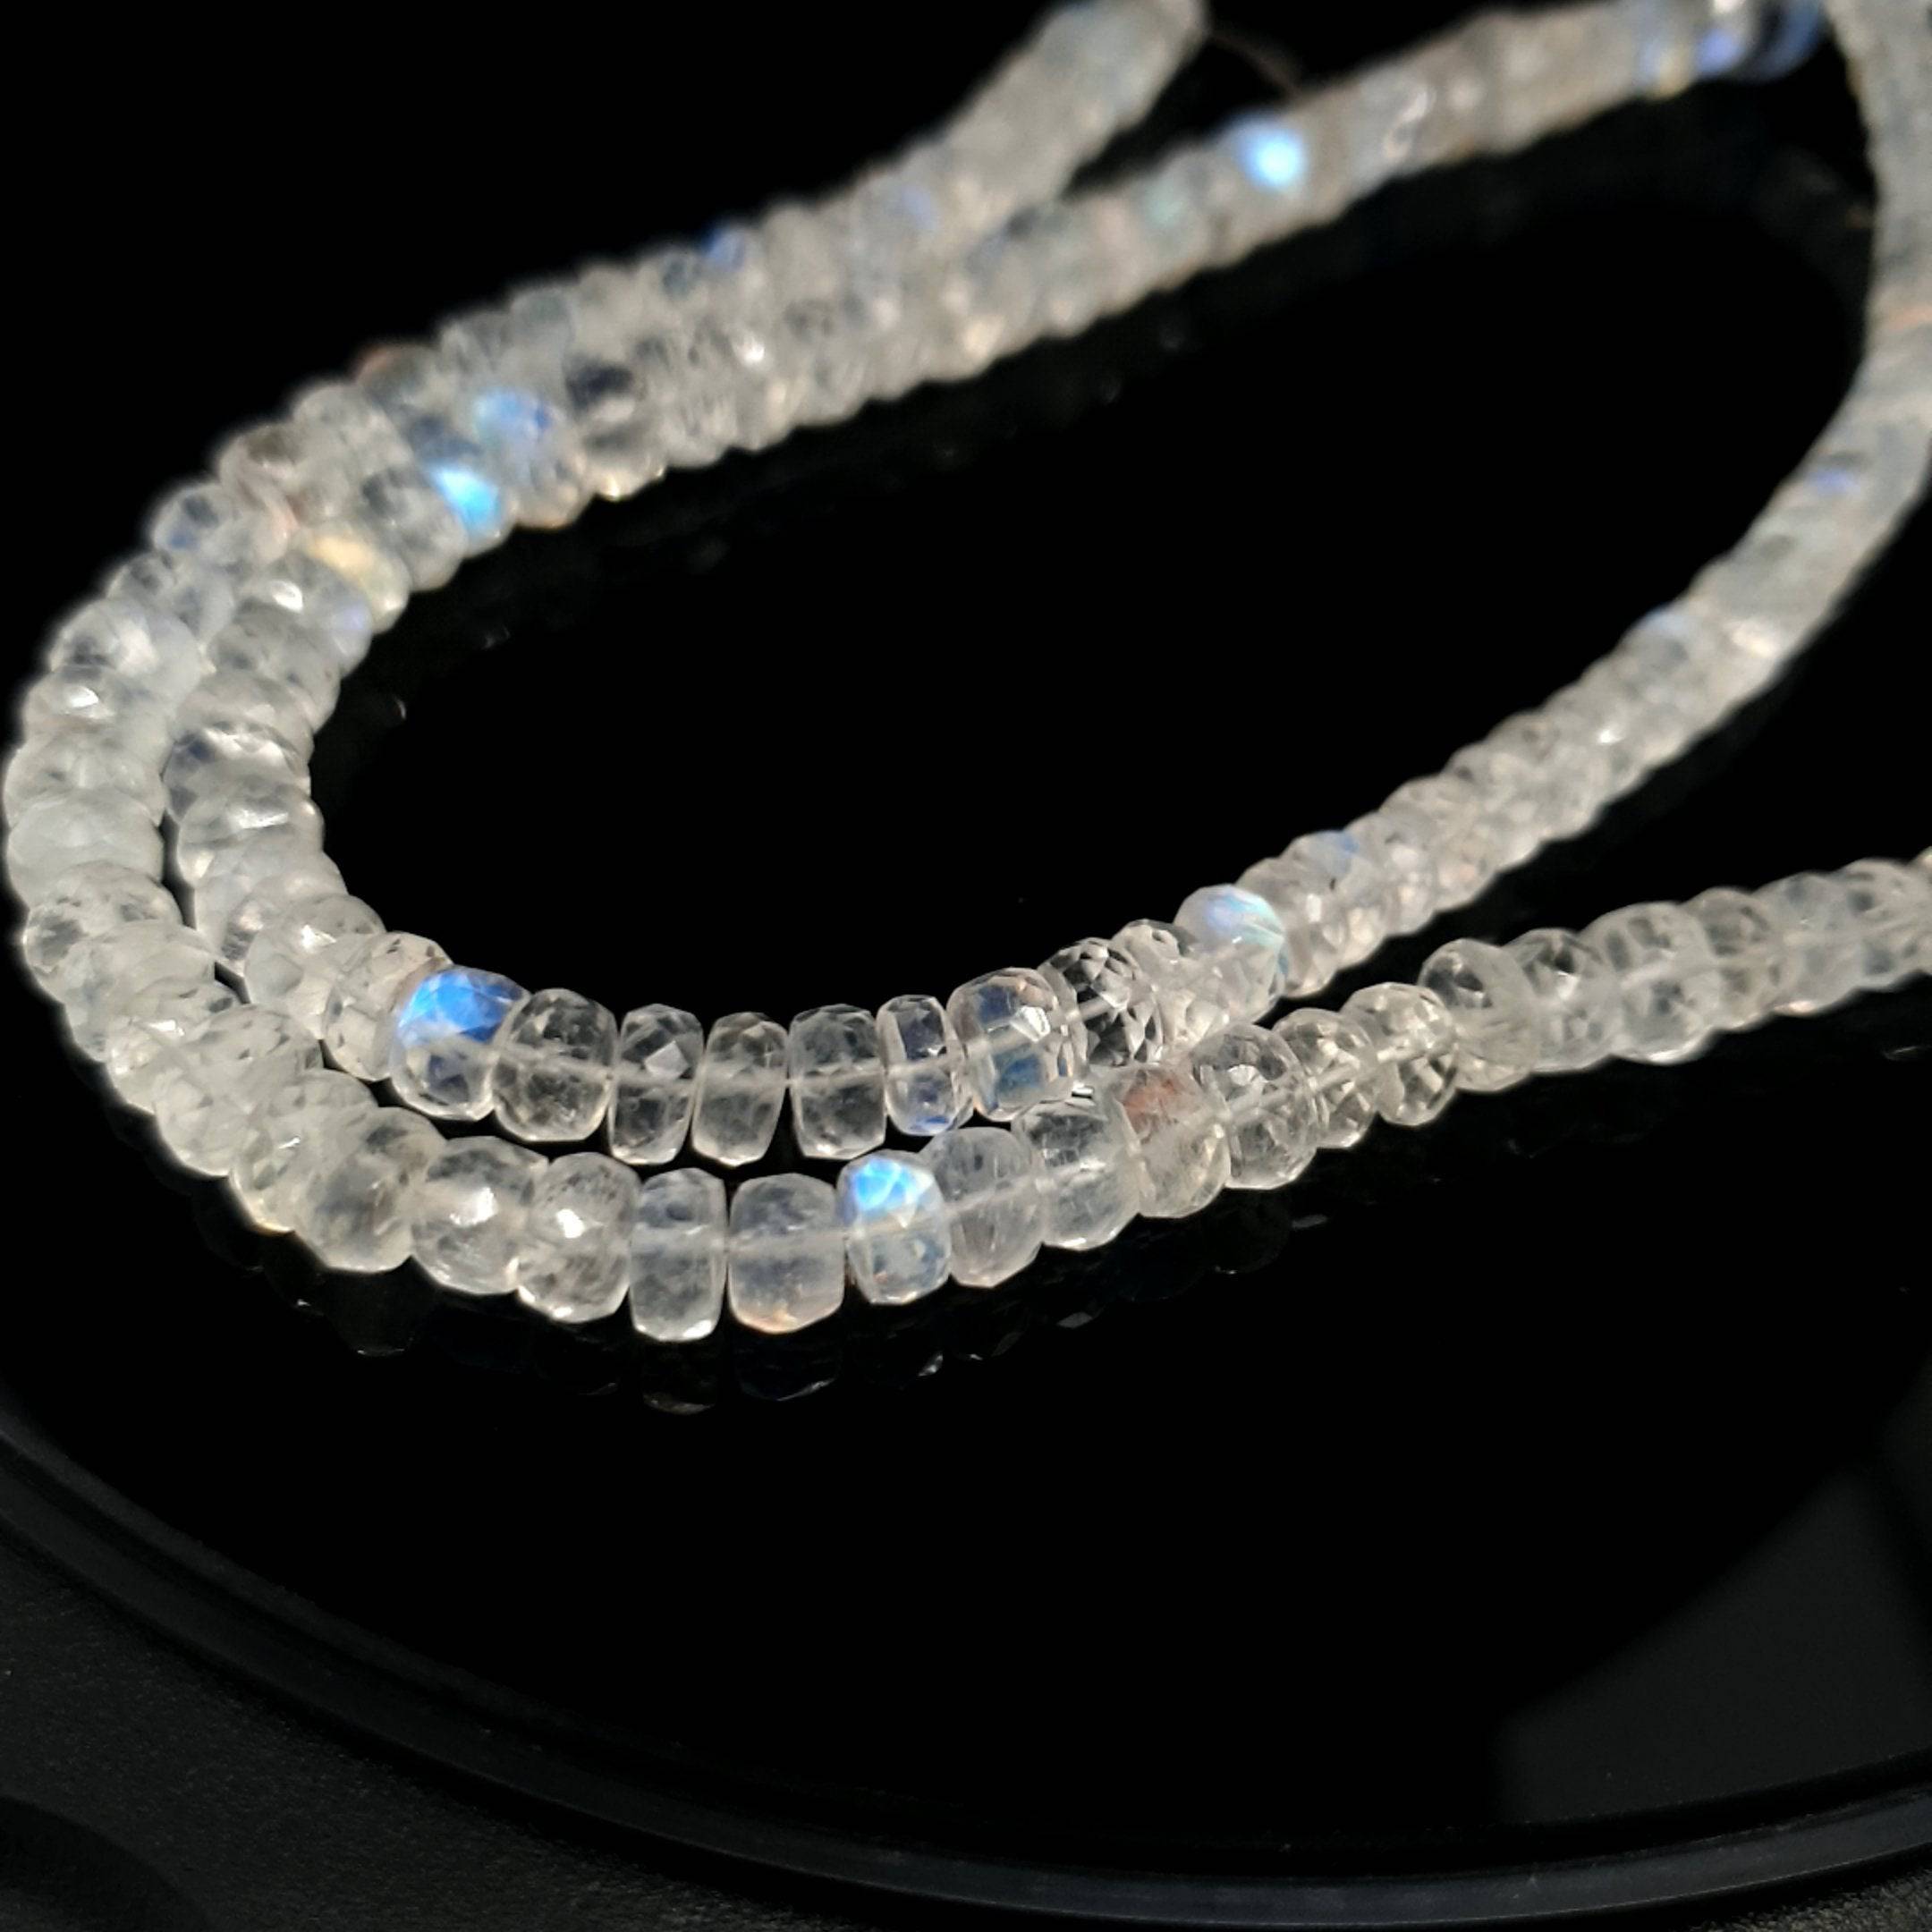 Moonstone 5-6mm Faceted Beads | 11" Inches - The LabradoriteKing